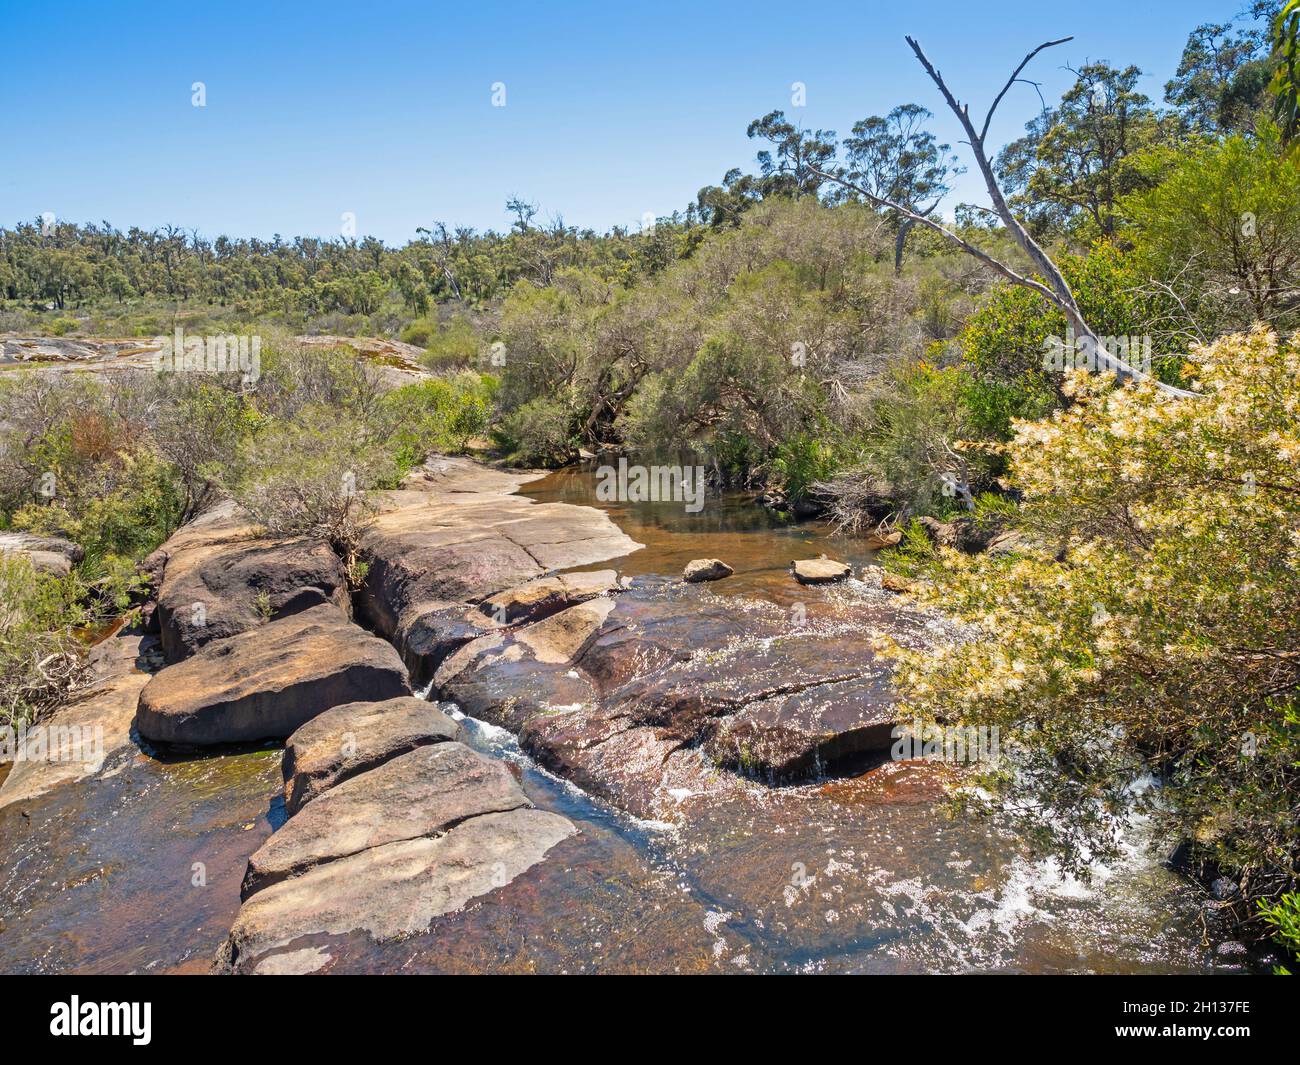 In winter and spring Jane Brook feeds into the Hovea Falls in John Forrest National Park, near Perth in Western Australia. Stock Photo